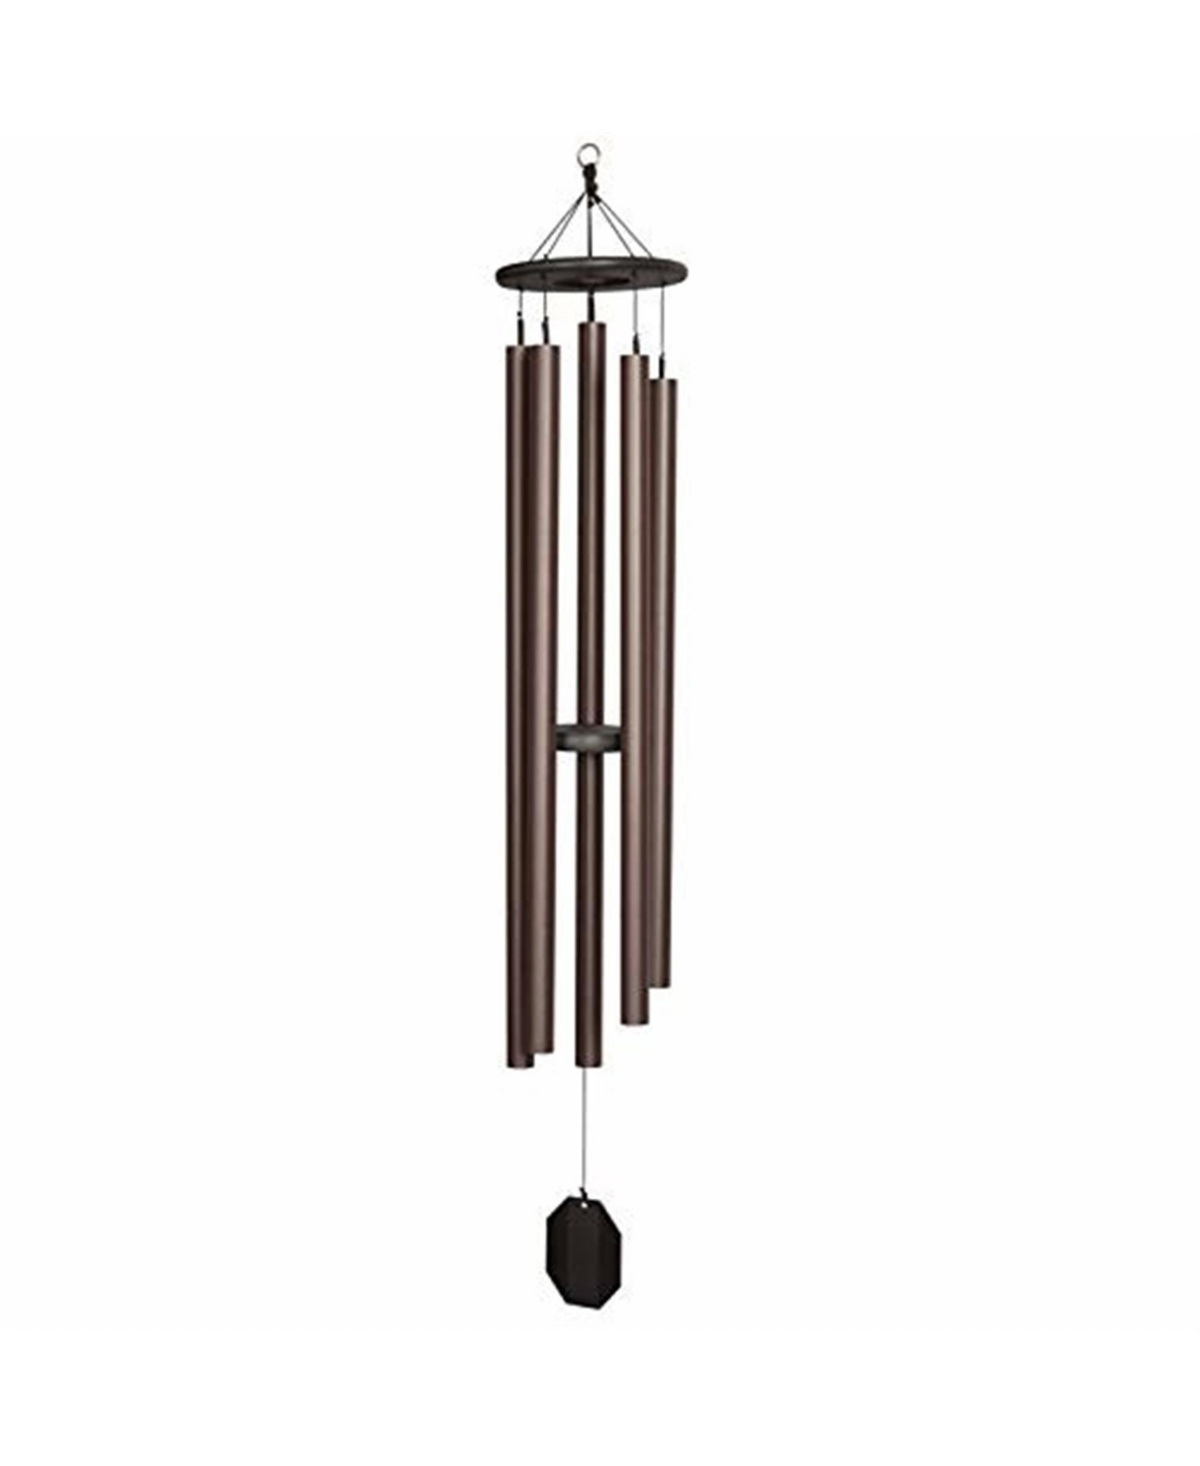 Lambright Country Chimes Amish Crafted Wind Chime, Court Haus - Brown